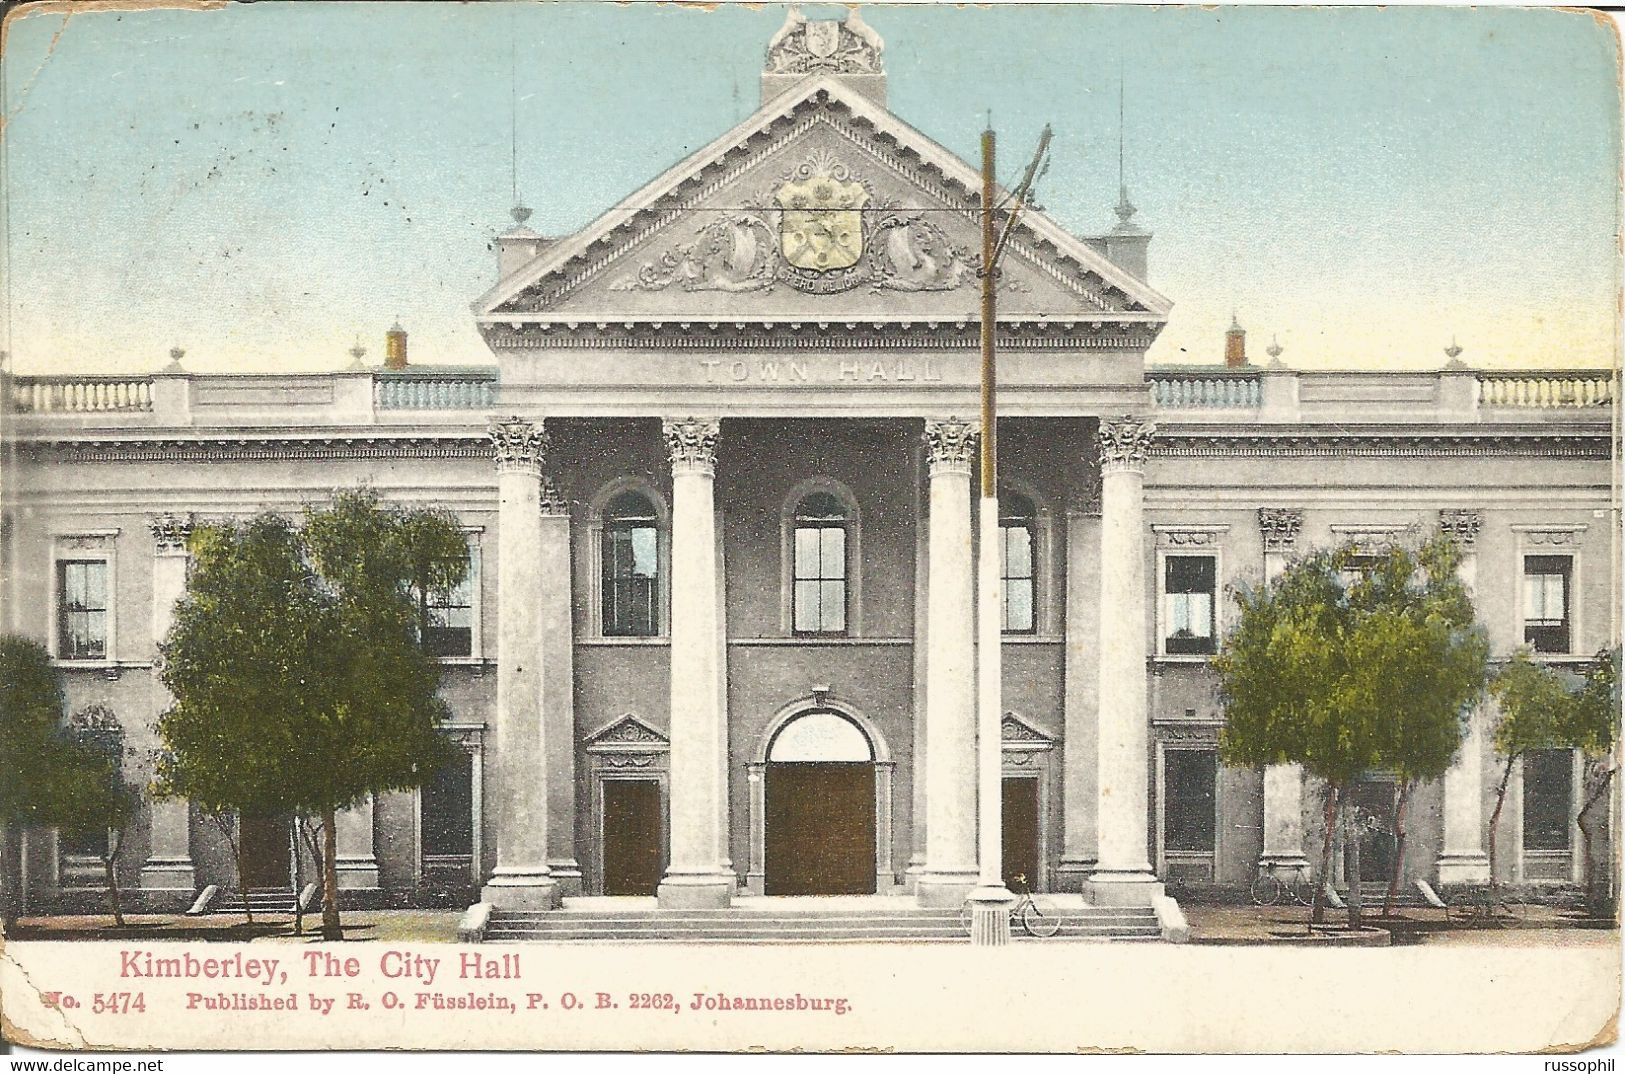 000206 - SOUTH AFRICA RSA - KIMBERLEY, THE CITY HALL - 1925 - South Africa